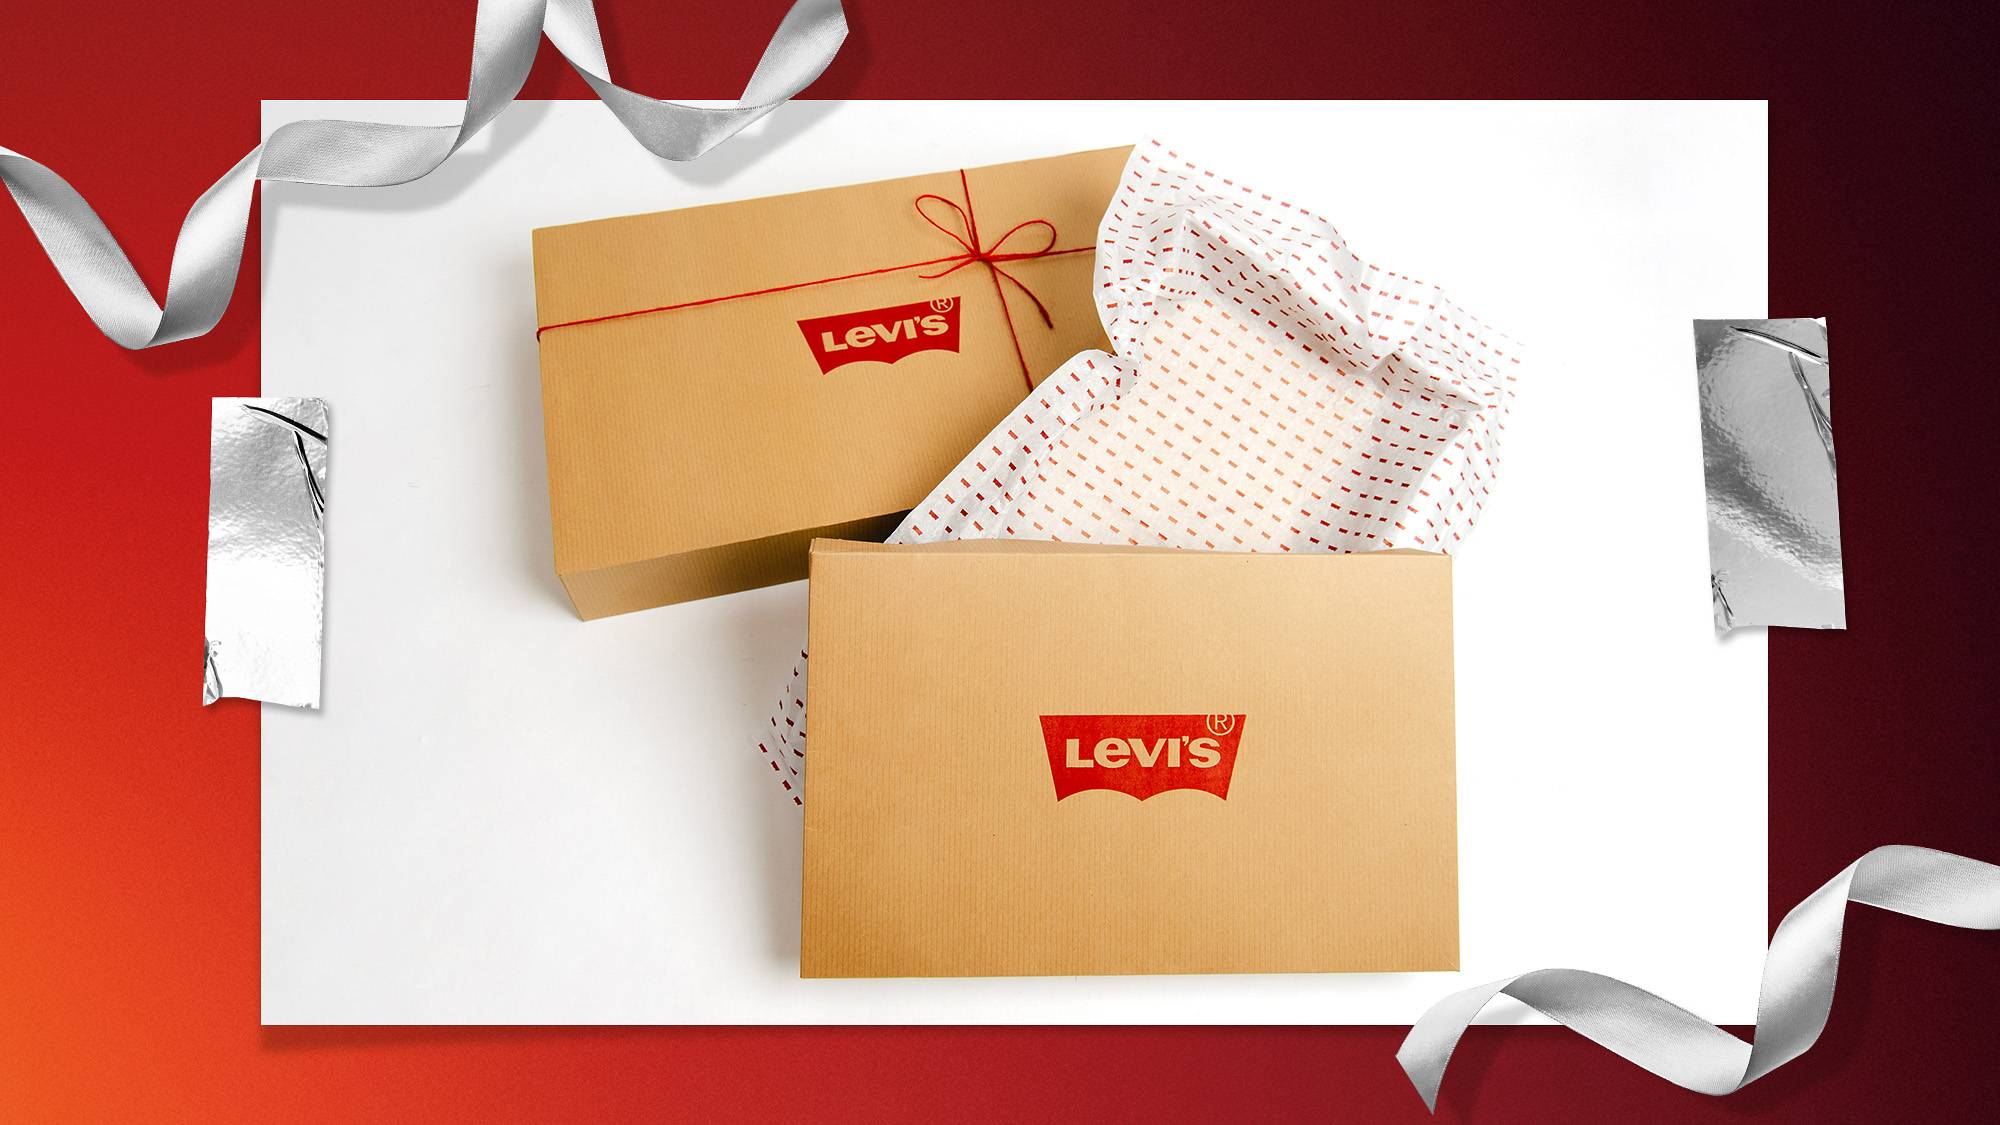 Image of Levi's gift boxes